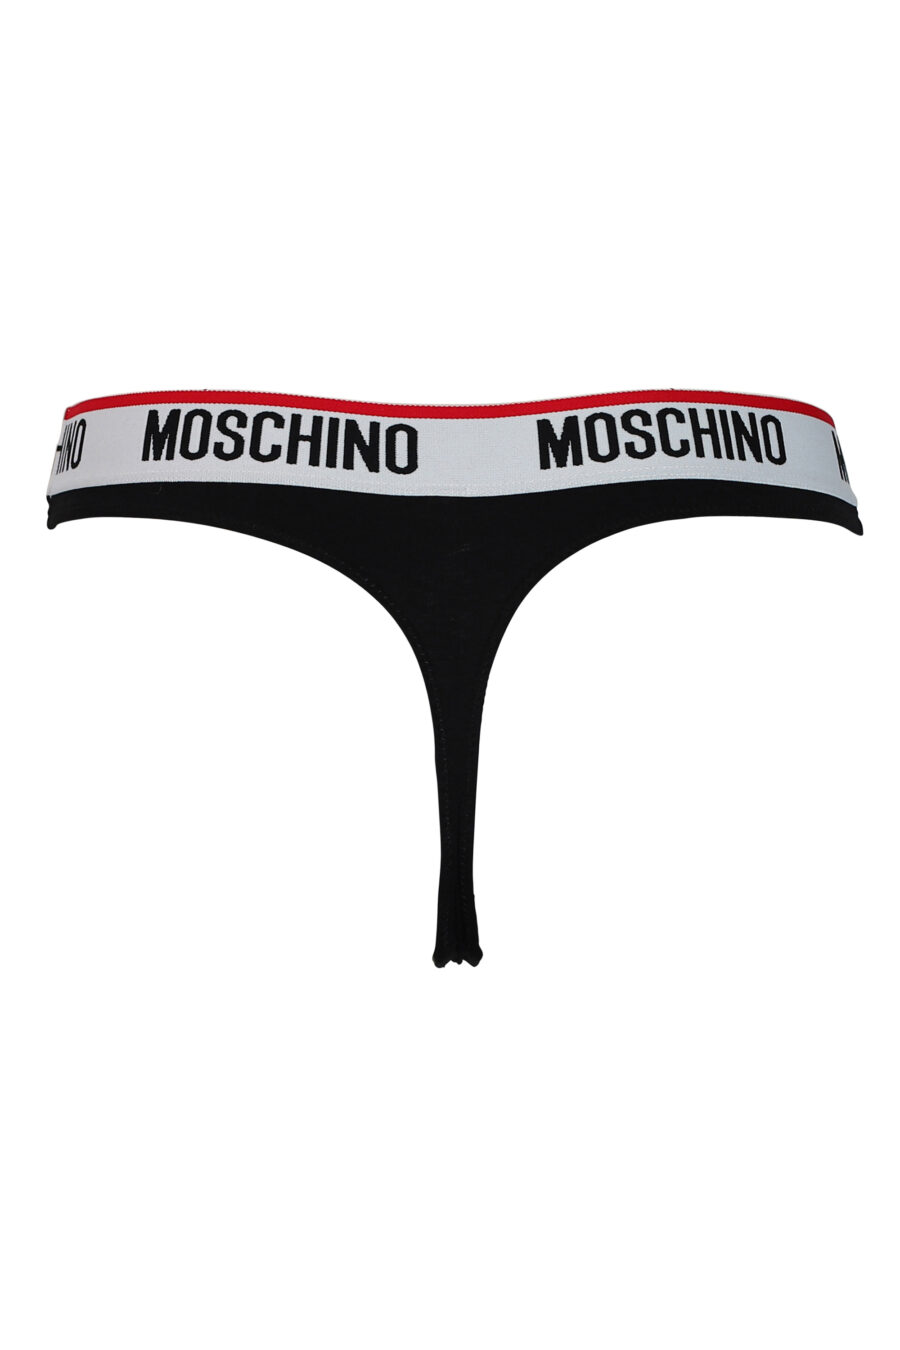 Moschino - Pack of 2 black thongs with ribbon logo and red line